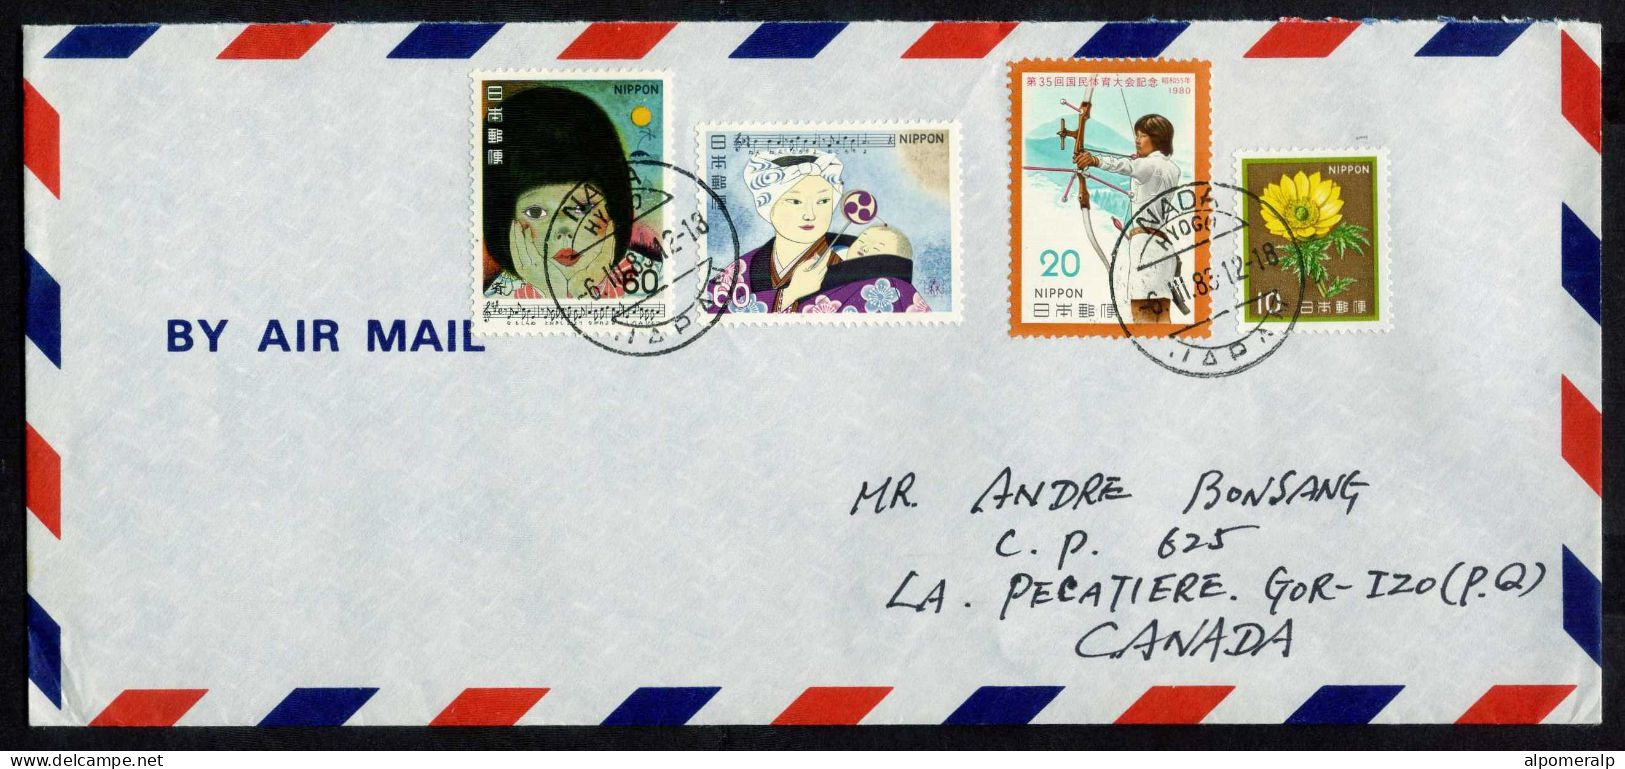 Japan 1980 80 ¥ Archery, Air Mail Cover Used To Canada From Nada | 1981 60 ¥ Japanese Songs, Music - Archery